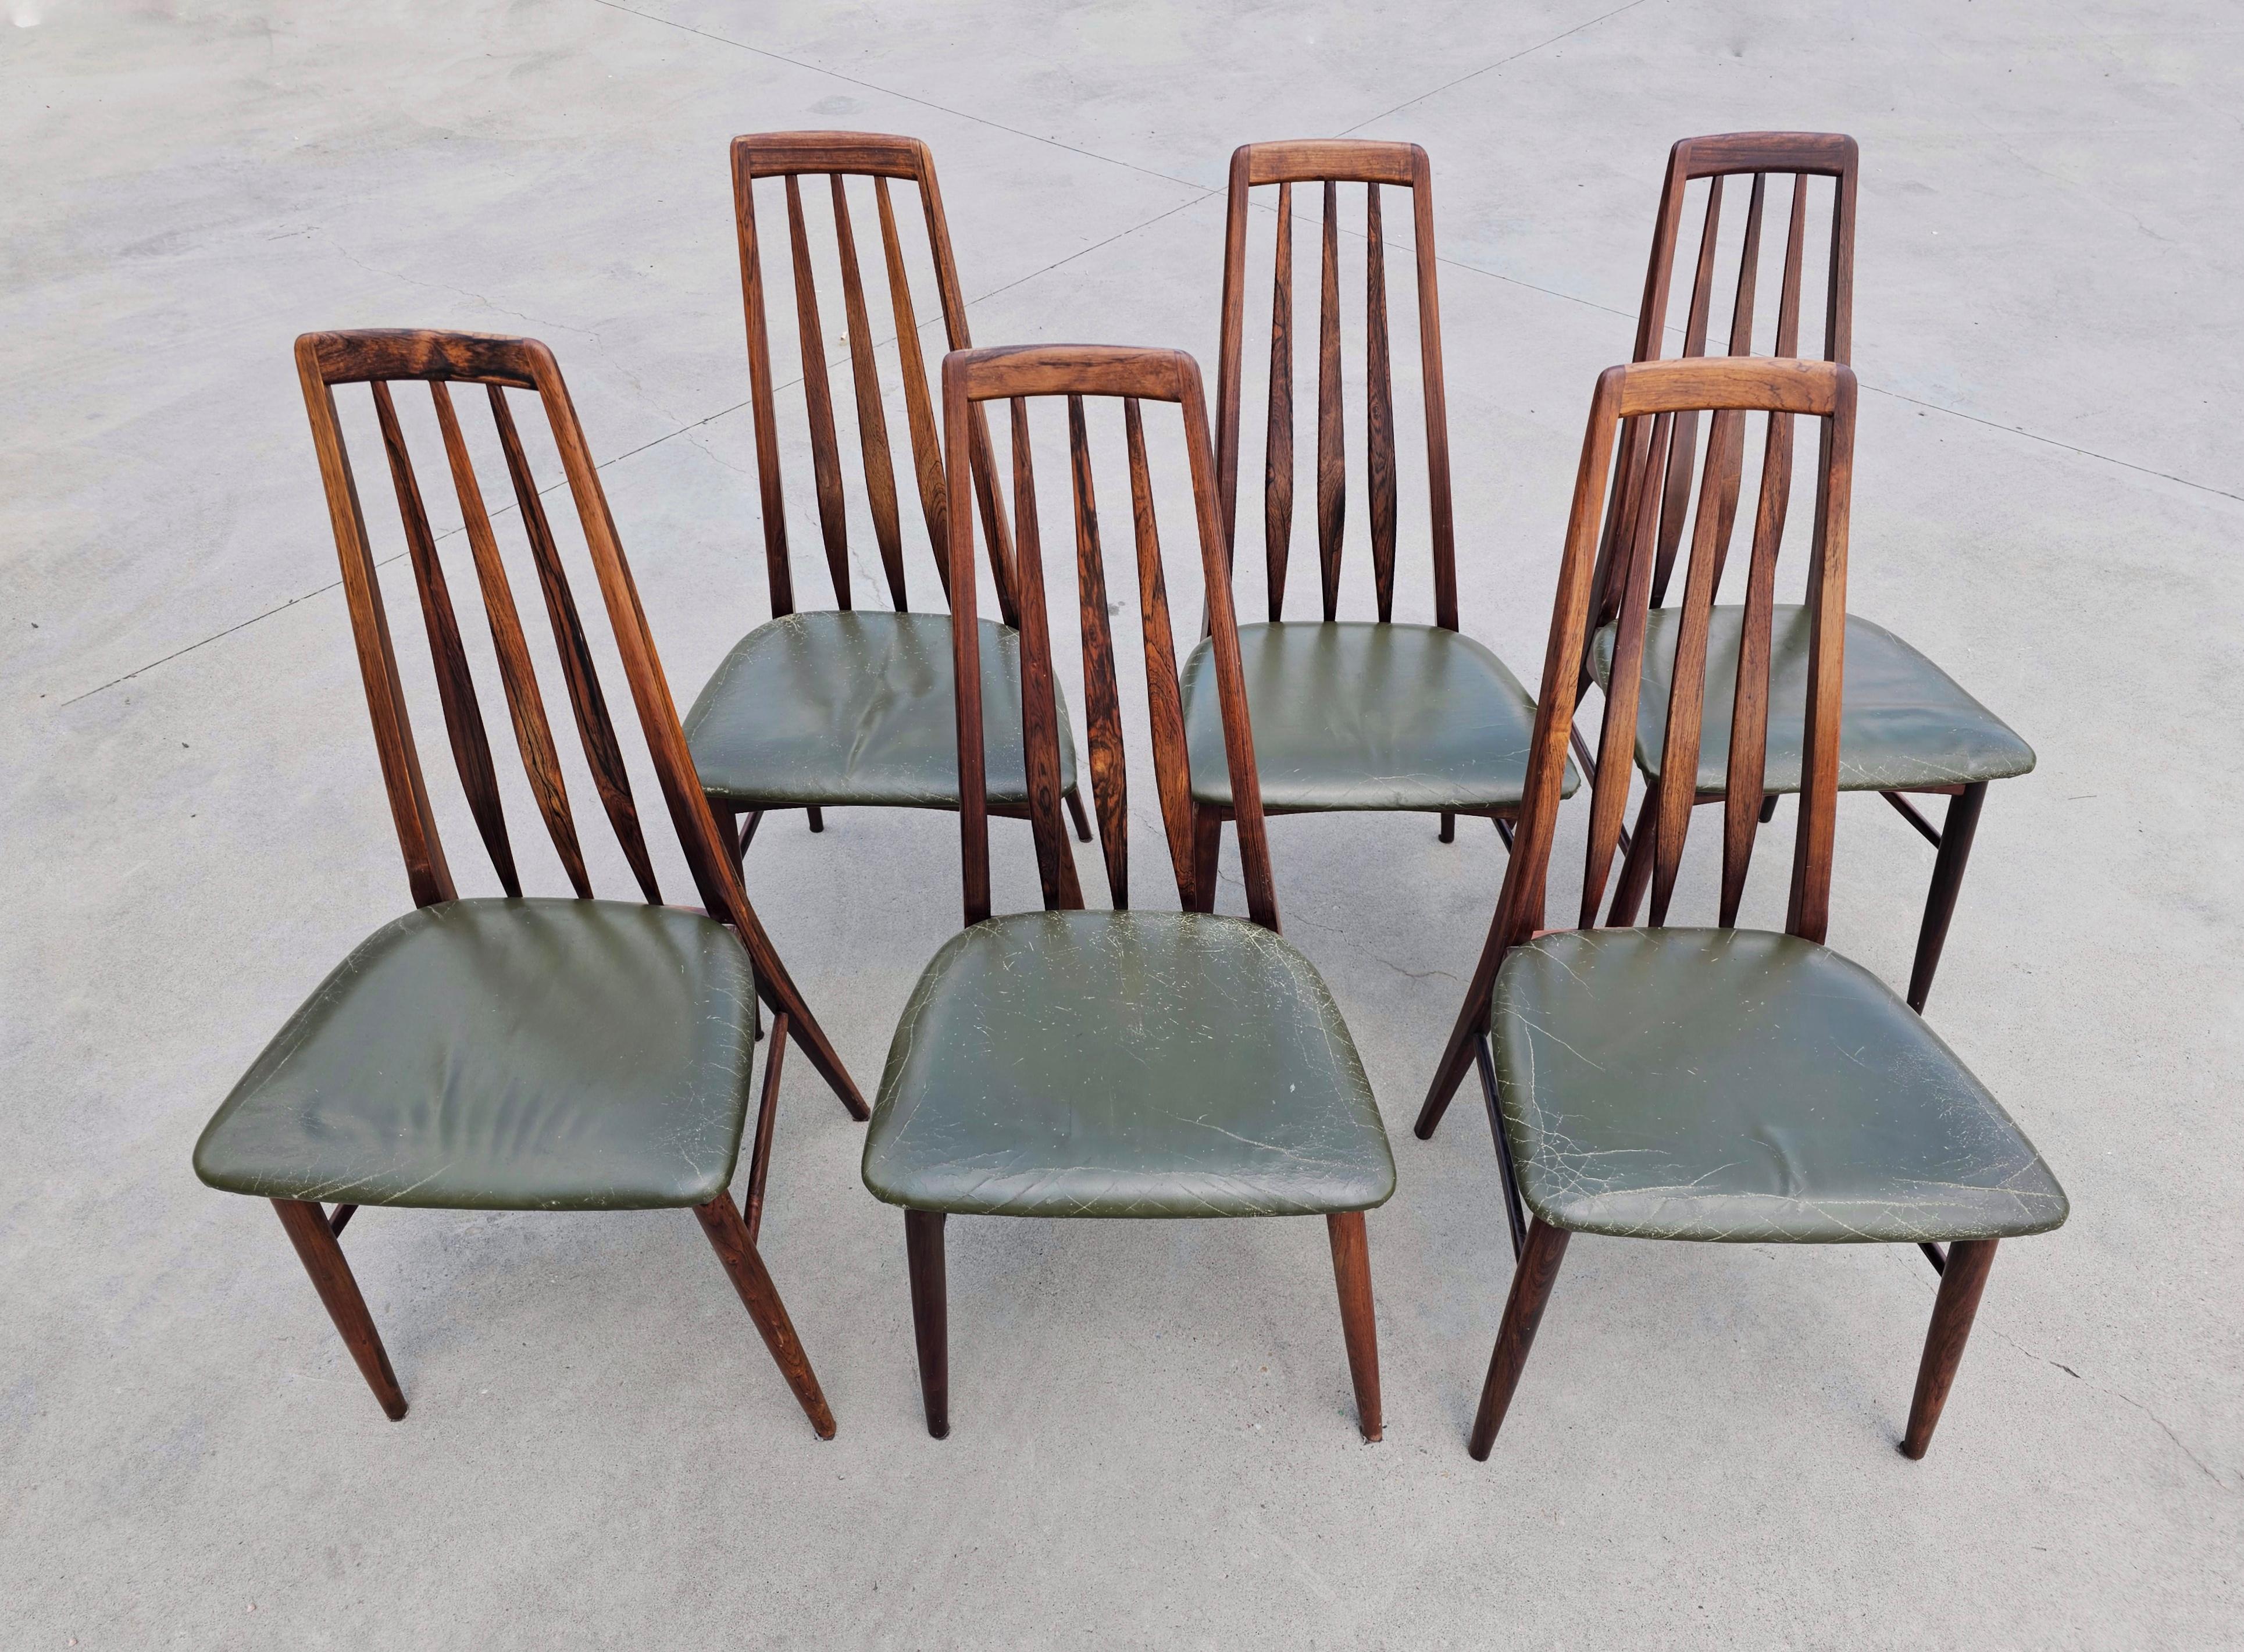 In this listing you will find a set of 6 Mid Century Modern Chairs, Model Eva, designed by Niels Koefoed for his Furniture Factory Hornslet. Chairs are done in Brasilian Rosewood. Seats are still with the original pleather upholstery.

ORIGIN: